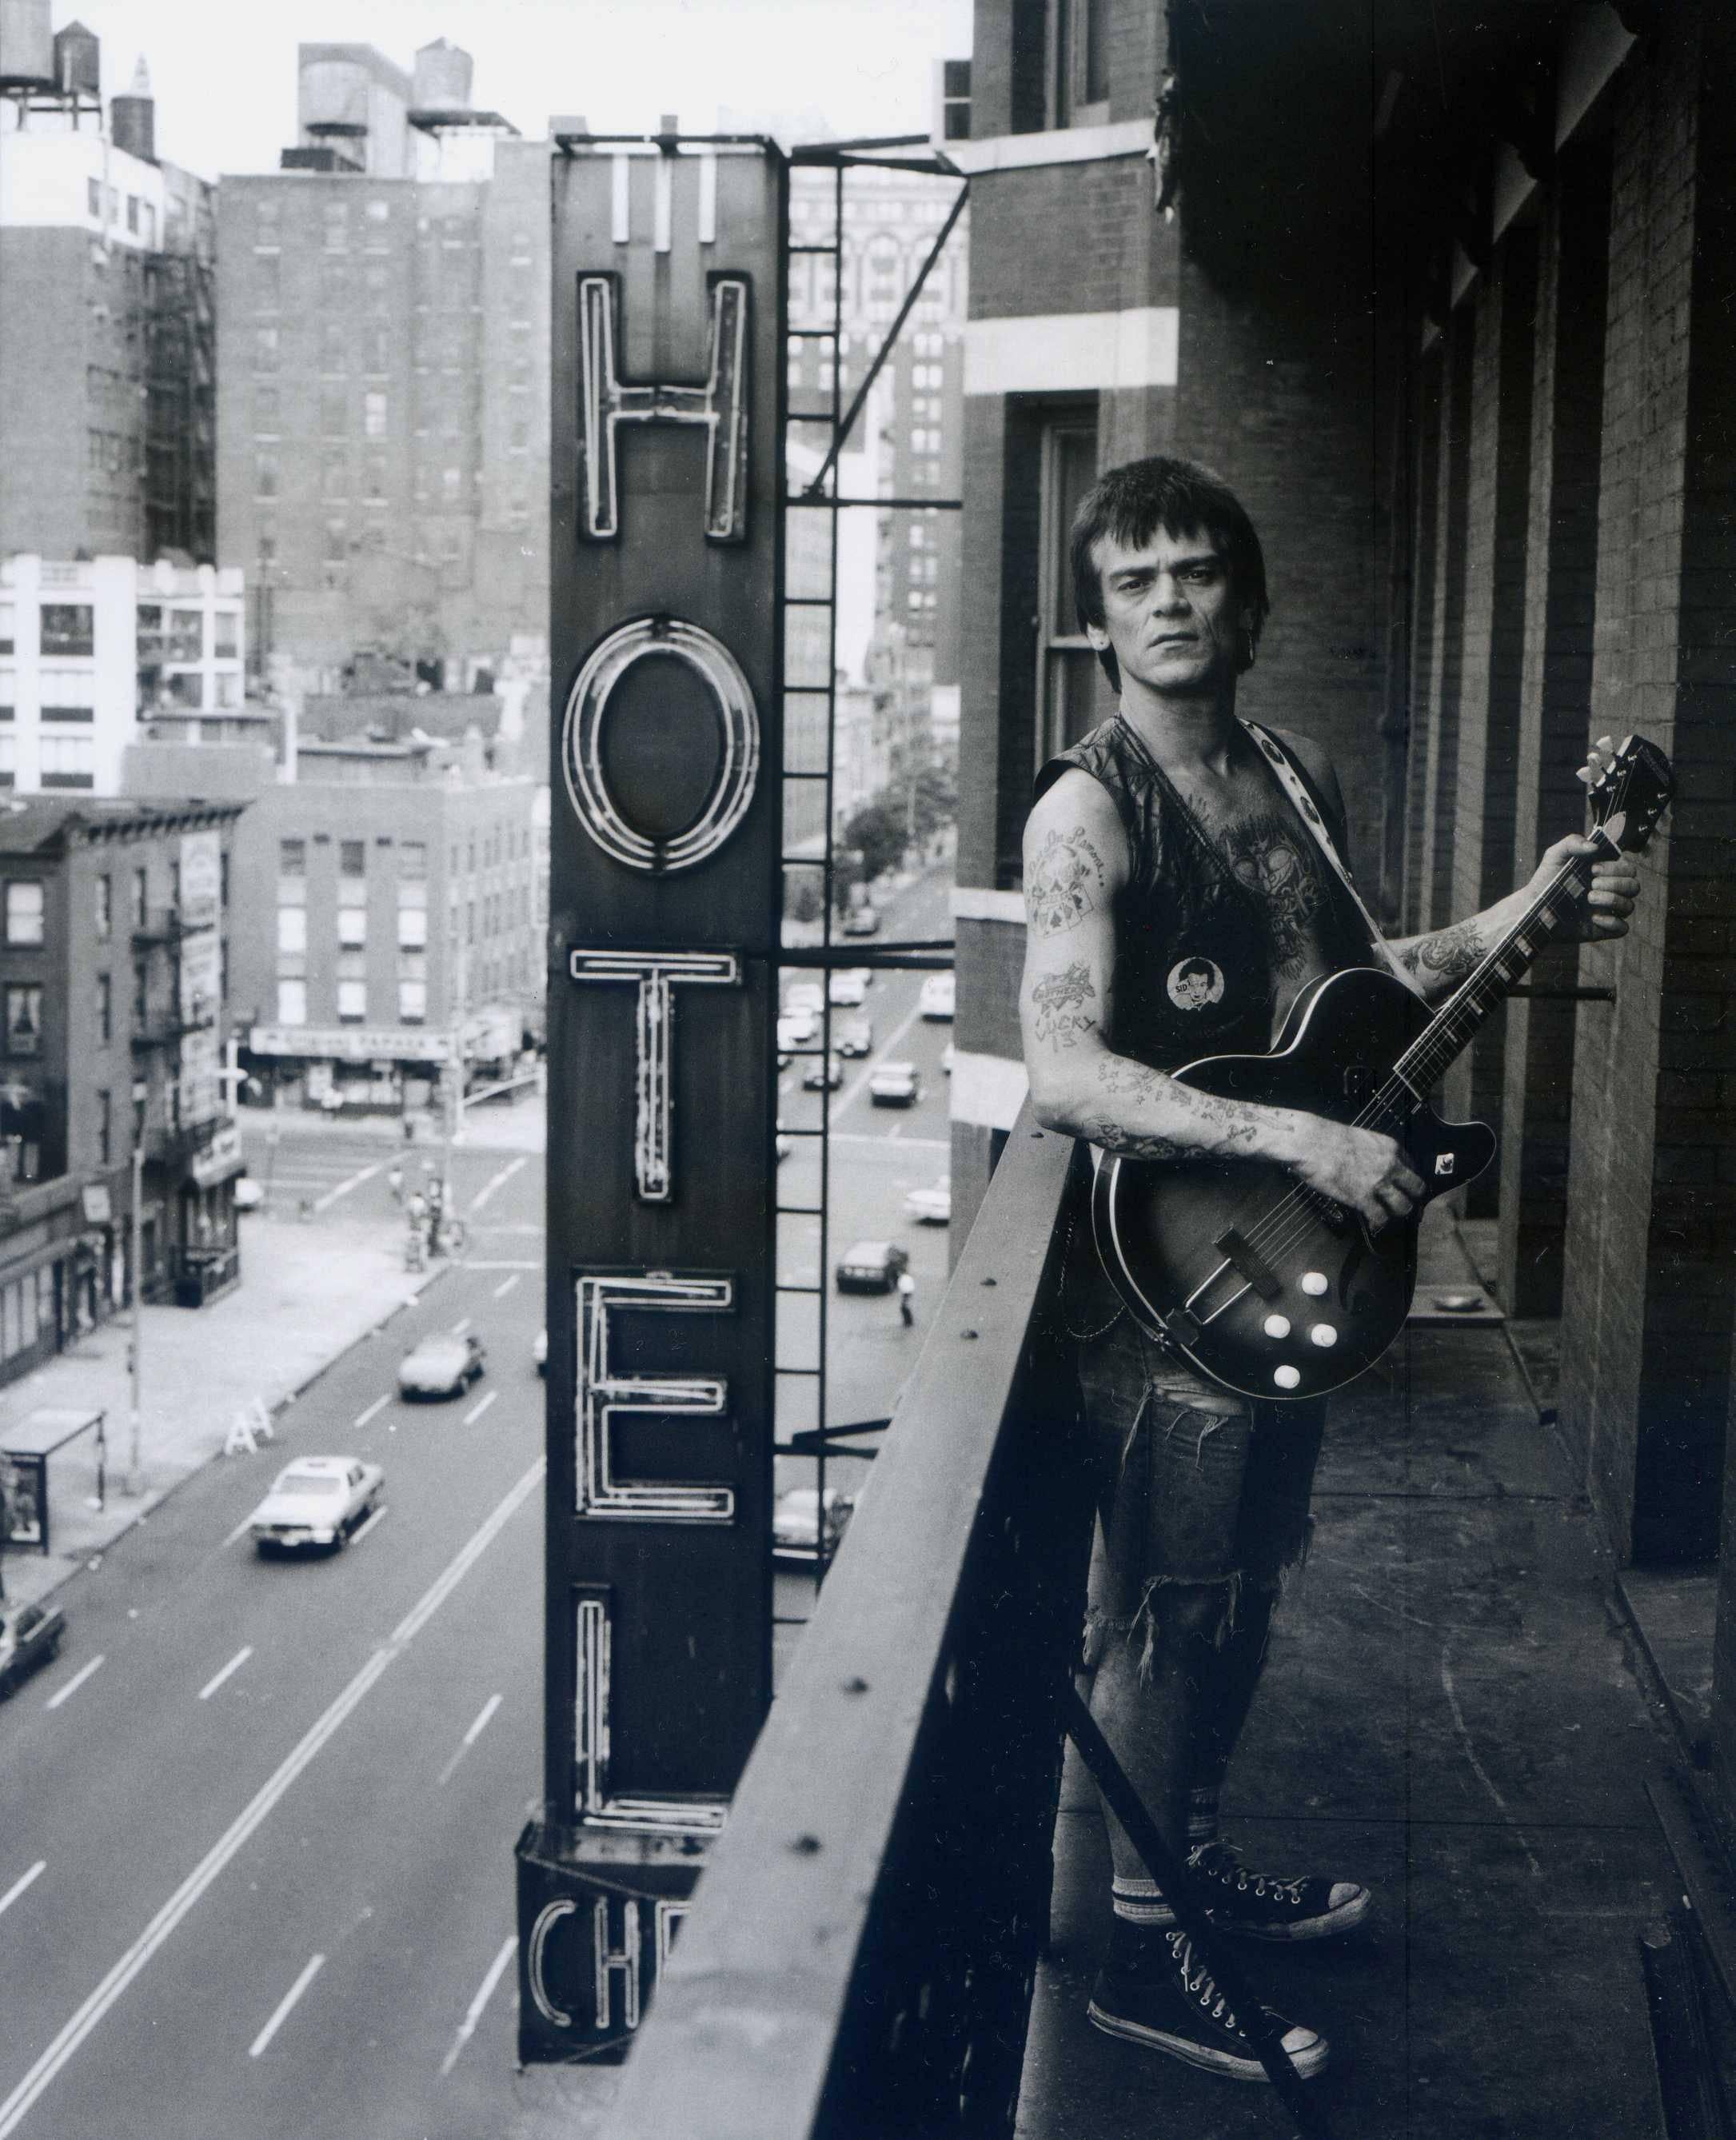 Keith Green Portrait Photograph - DeeDee Ramone on Balcony: #2 signed print exhibited at the GRAMMY Museum in LA.